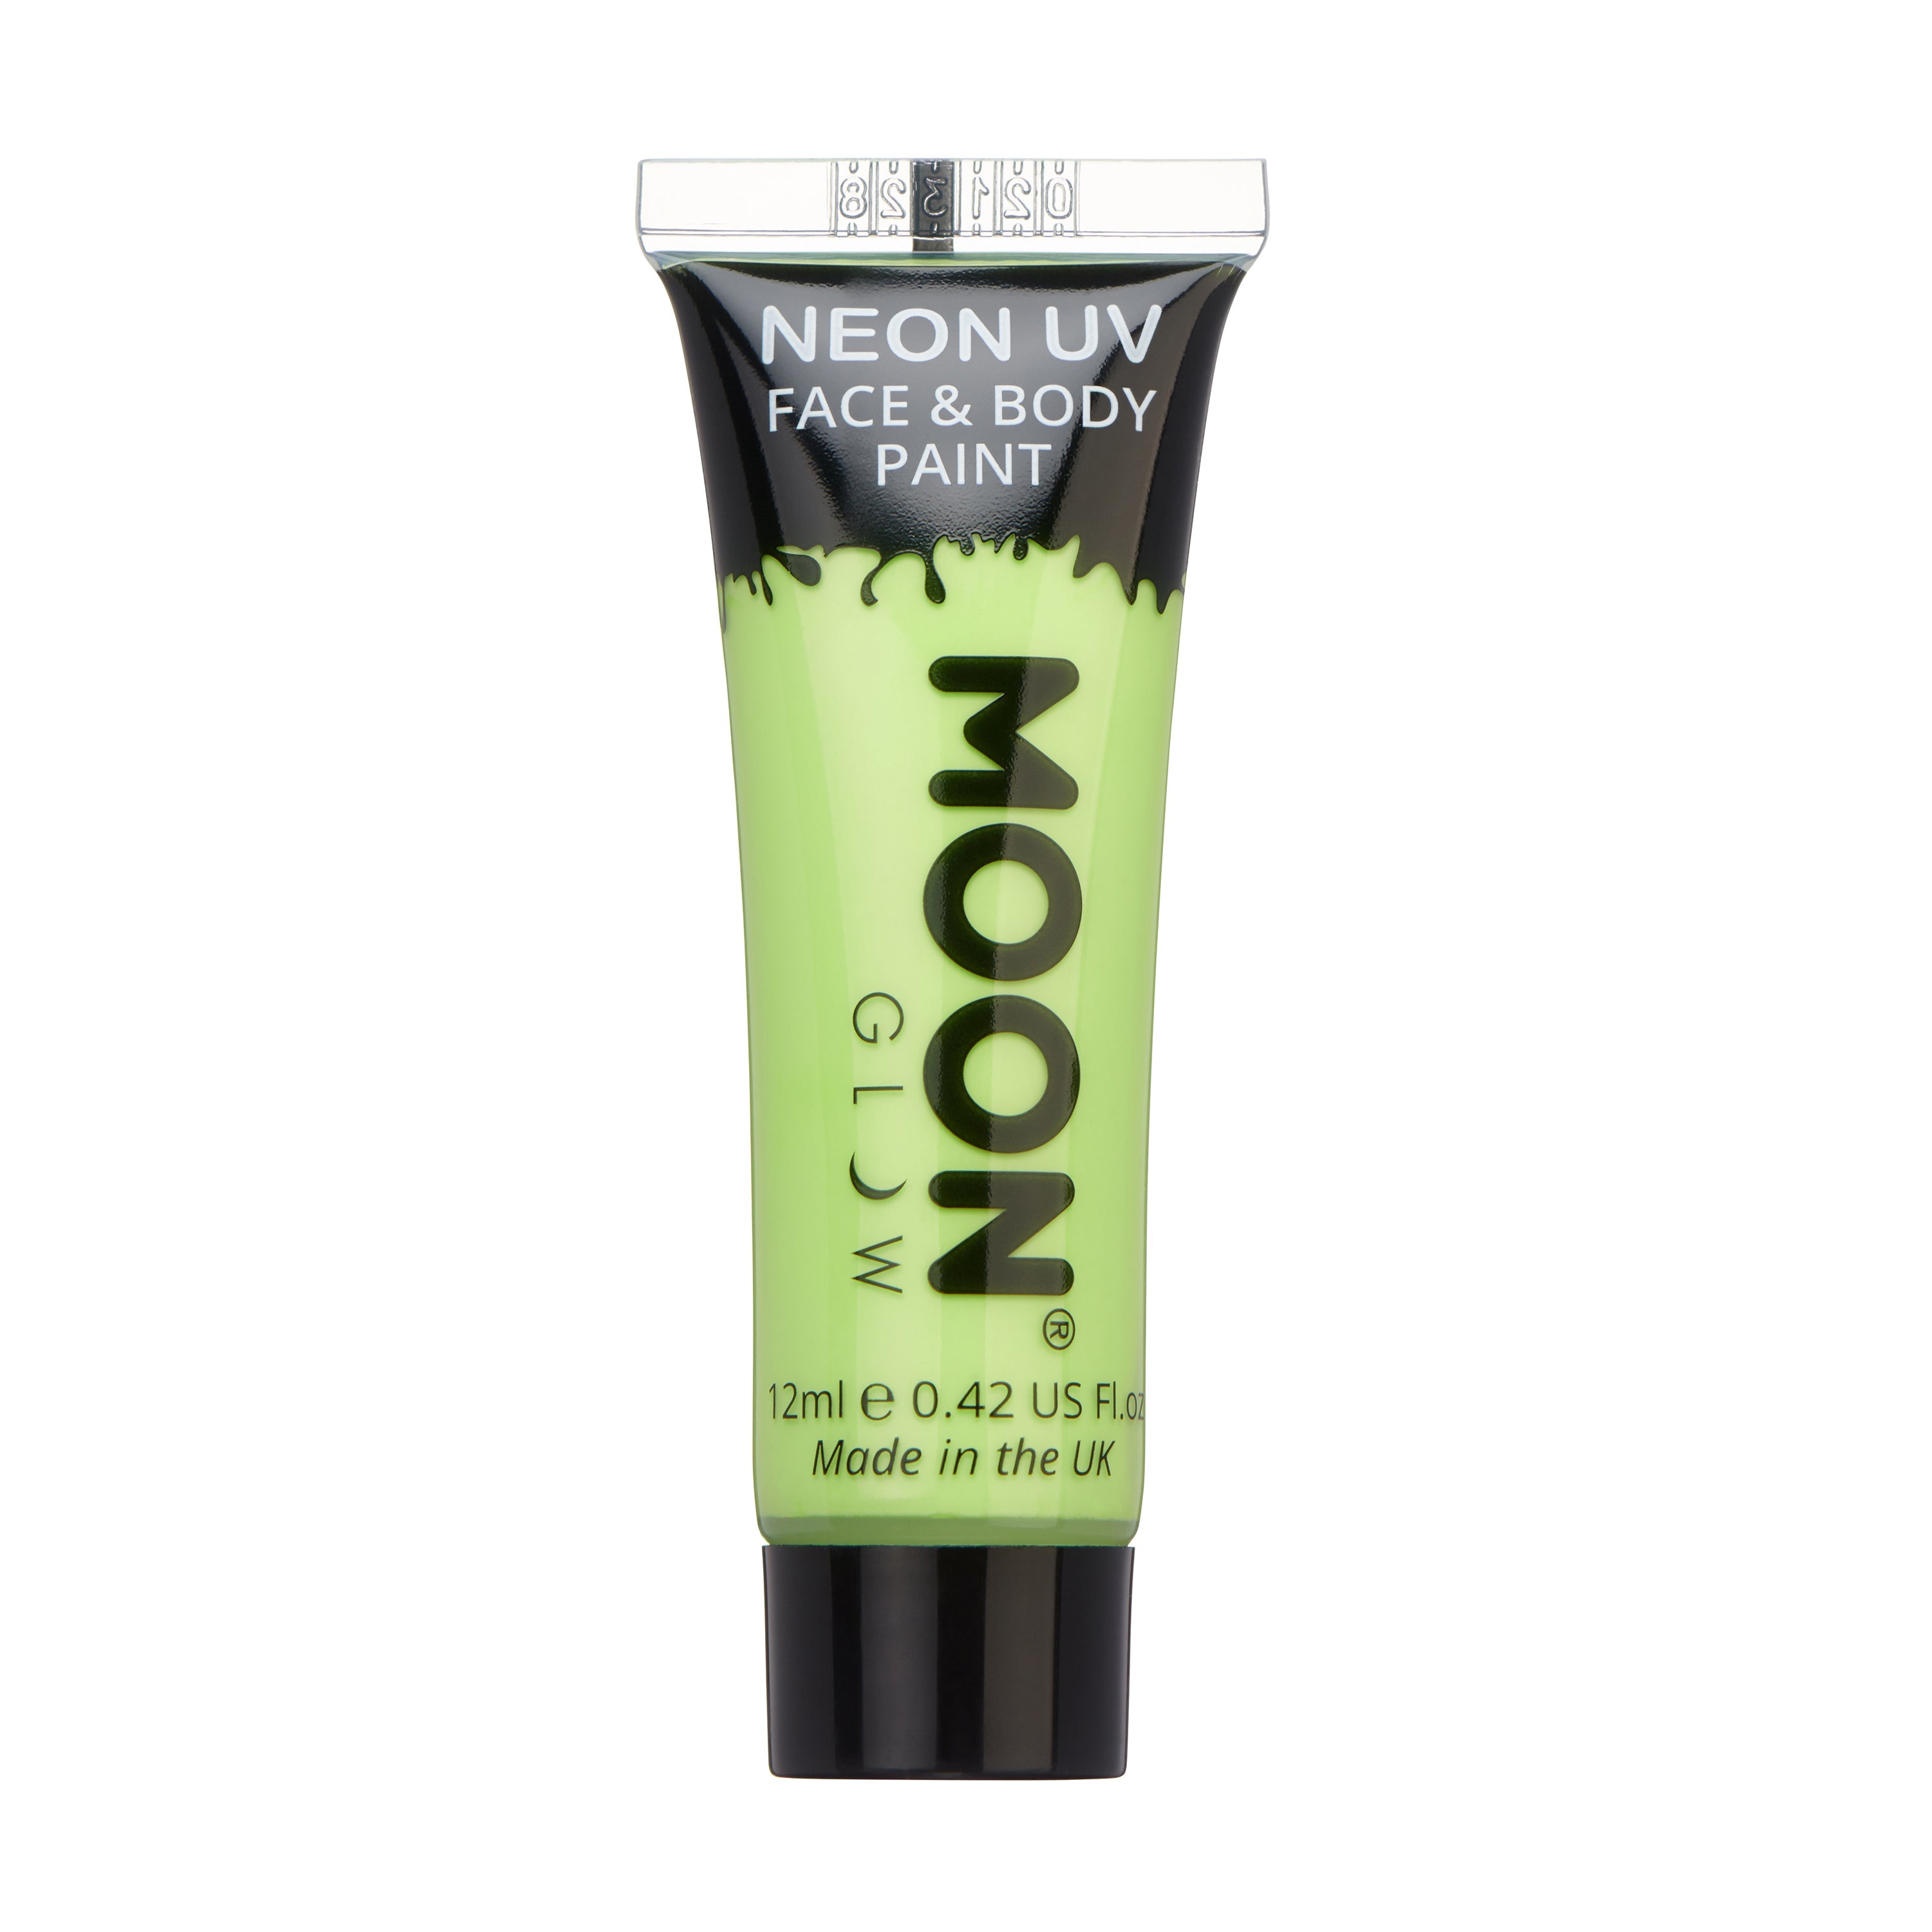 Pastel Green - Neon UV Glow Blacklight Face & Body Paint Makeup, 12mL. Cosmetically certified, FDA & Health Canada compliant, cruelty free and vegan.